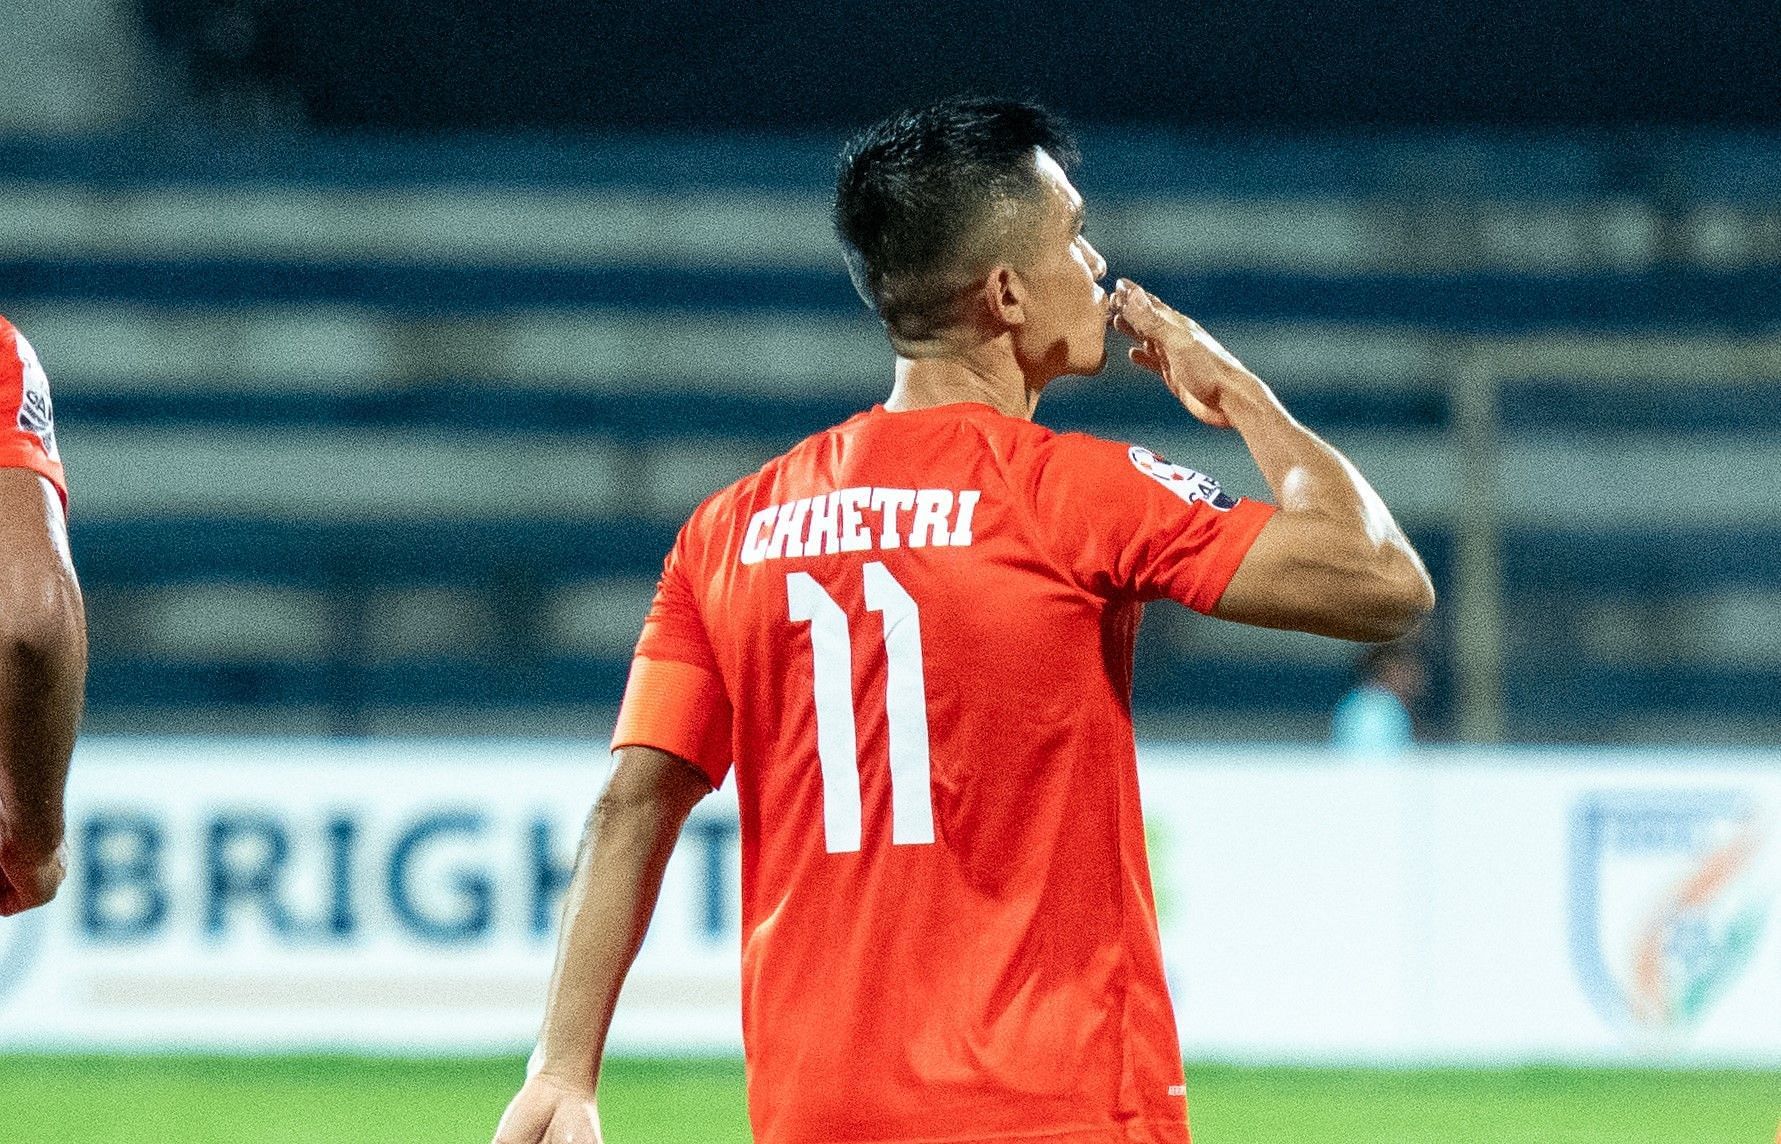 Sunil Chhetri has been the talisman for the Indian national team for over a decade.